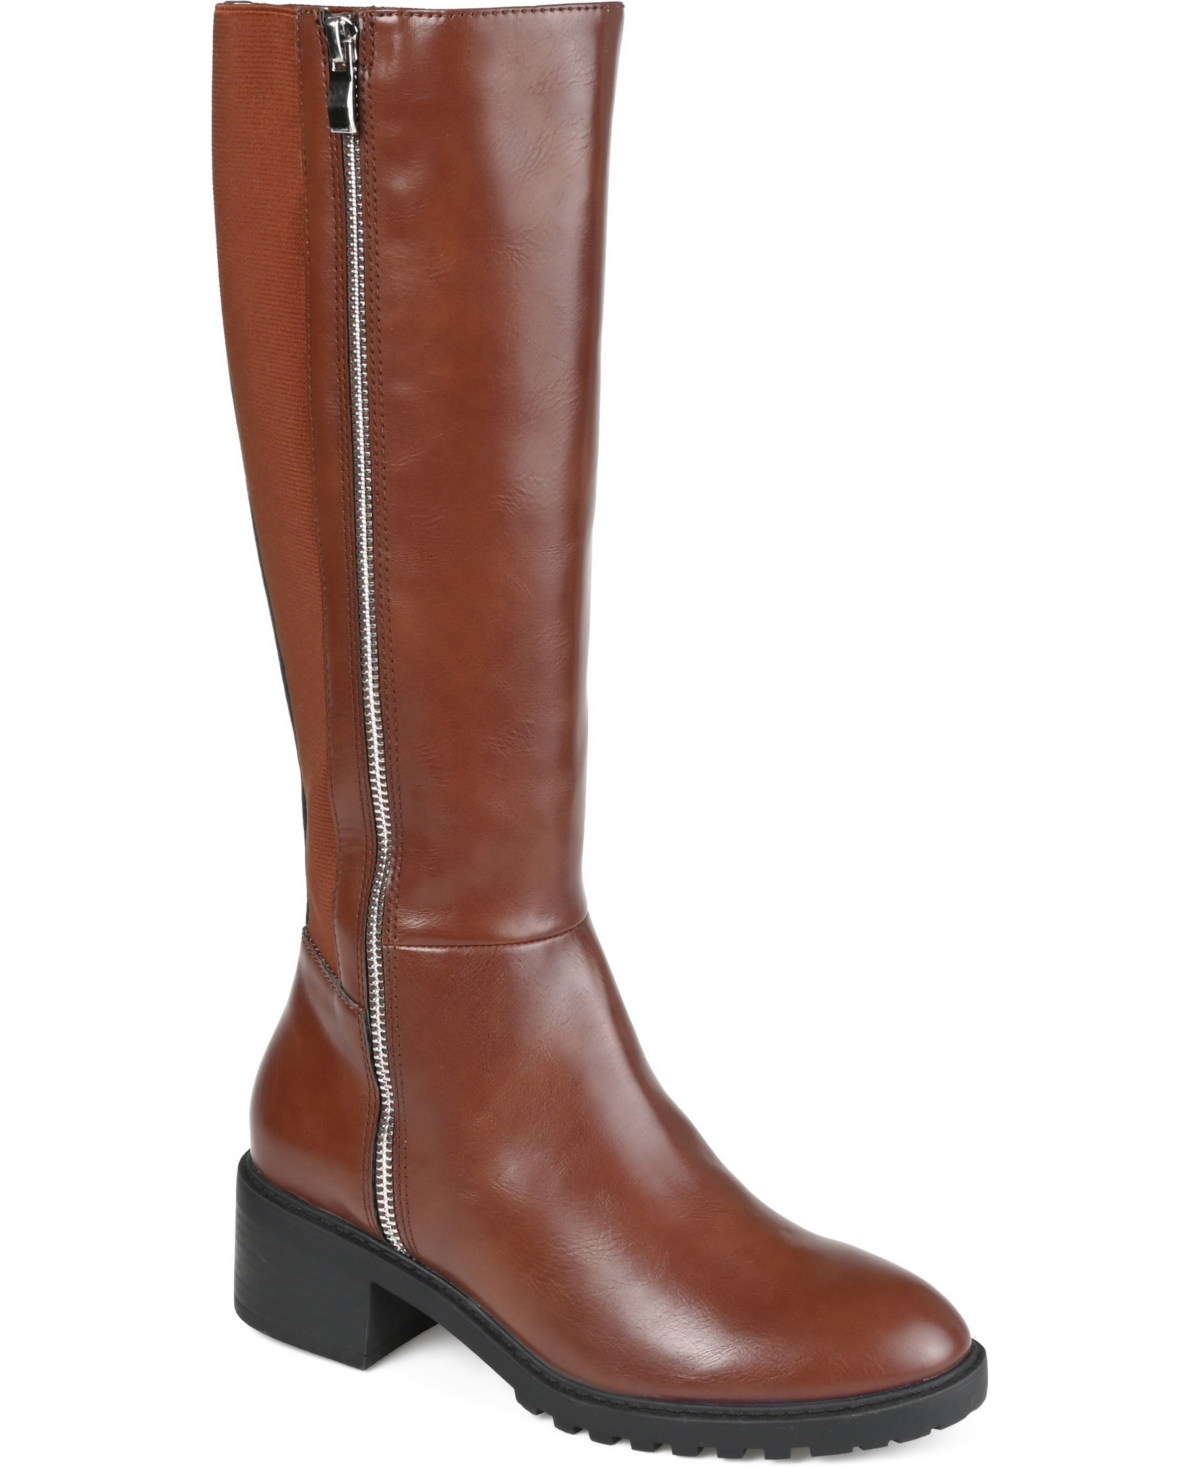 Women's Morgaan Extra Wide Calf Boots - Red